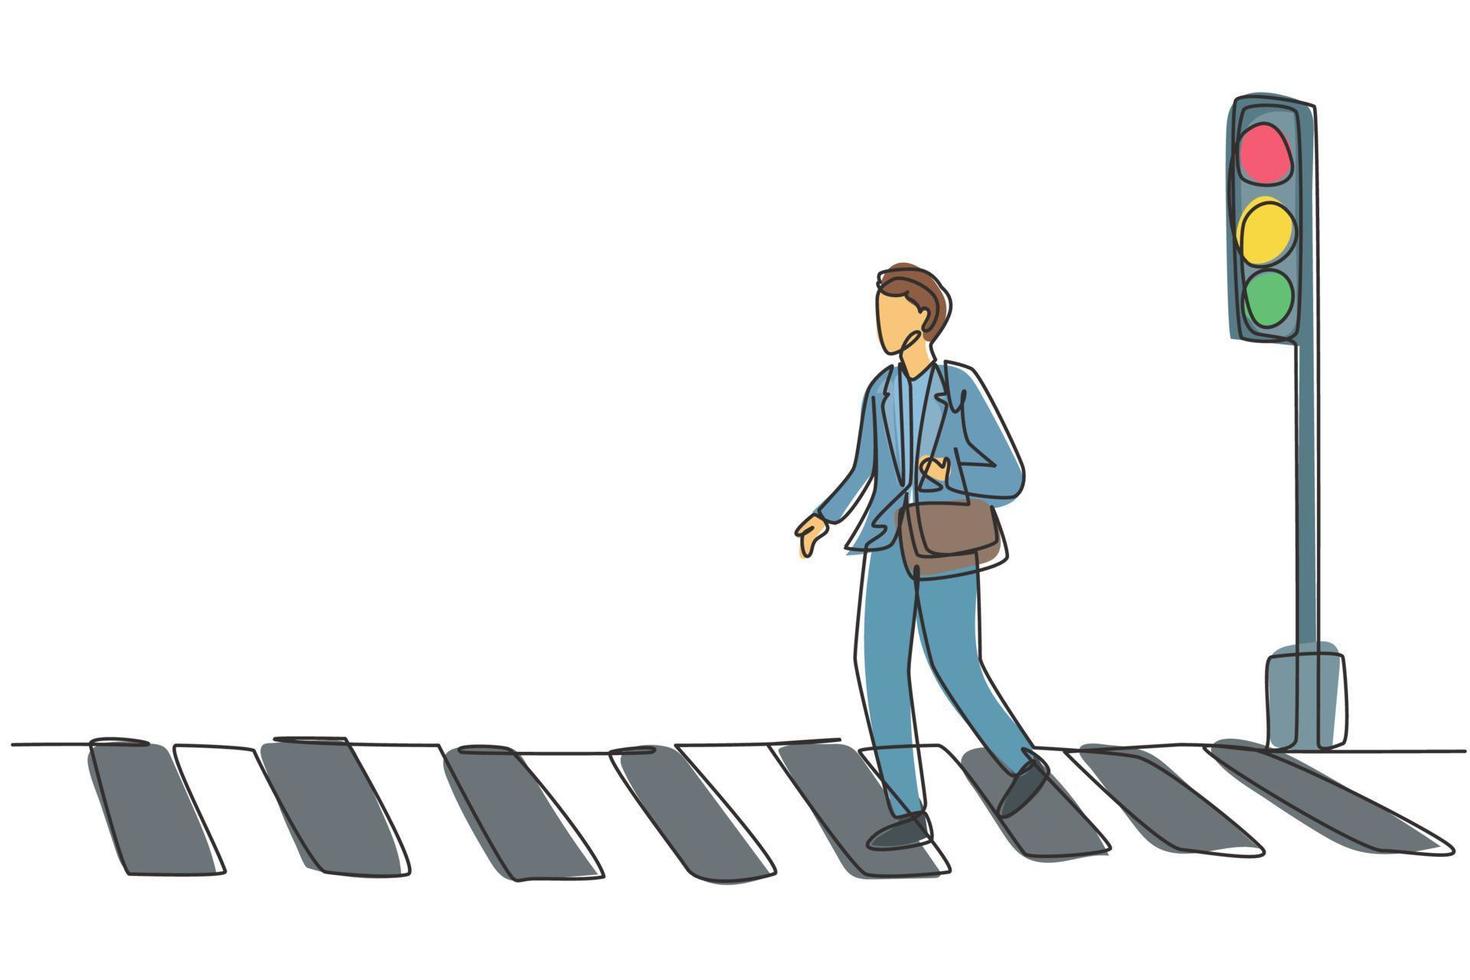 Continuous one line drawing a male worker crosses the road on the zebra crossing after returning from work. There's a traffic light there too. Single line draw design vector graphic illustration.